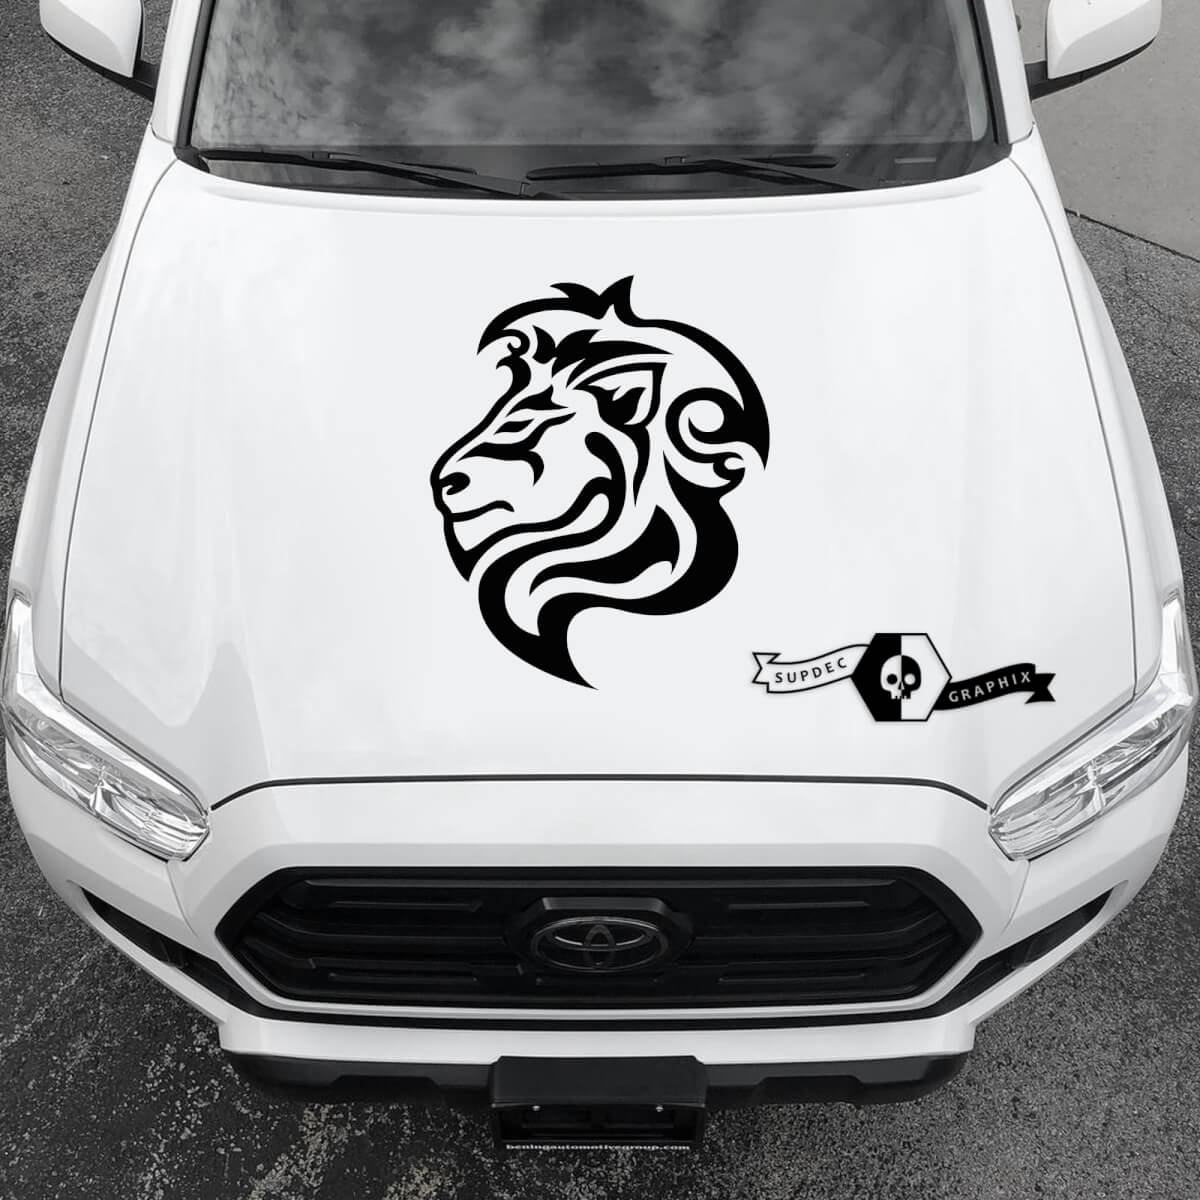 New Hood ANIMALS Leo Decal Sticker Graphic Kit fits Toyota RAV4 or Any Cars vinyl decal sticker